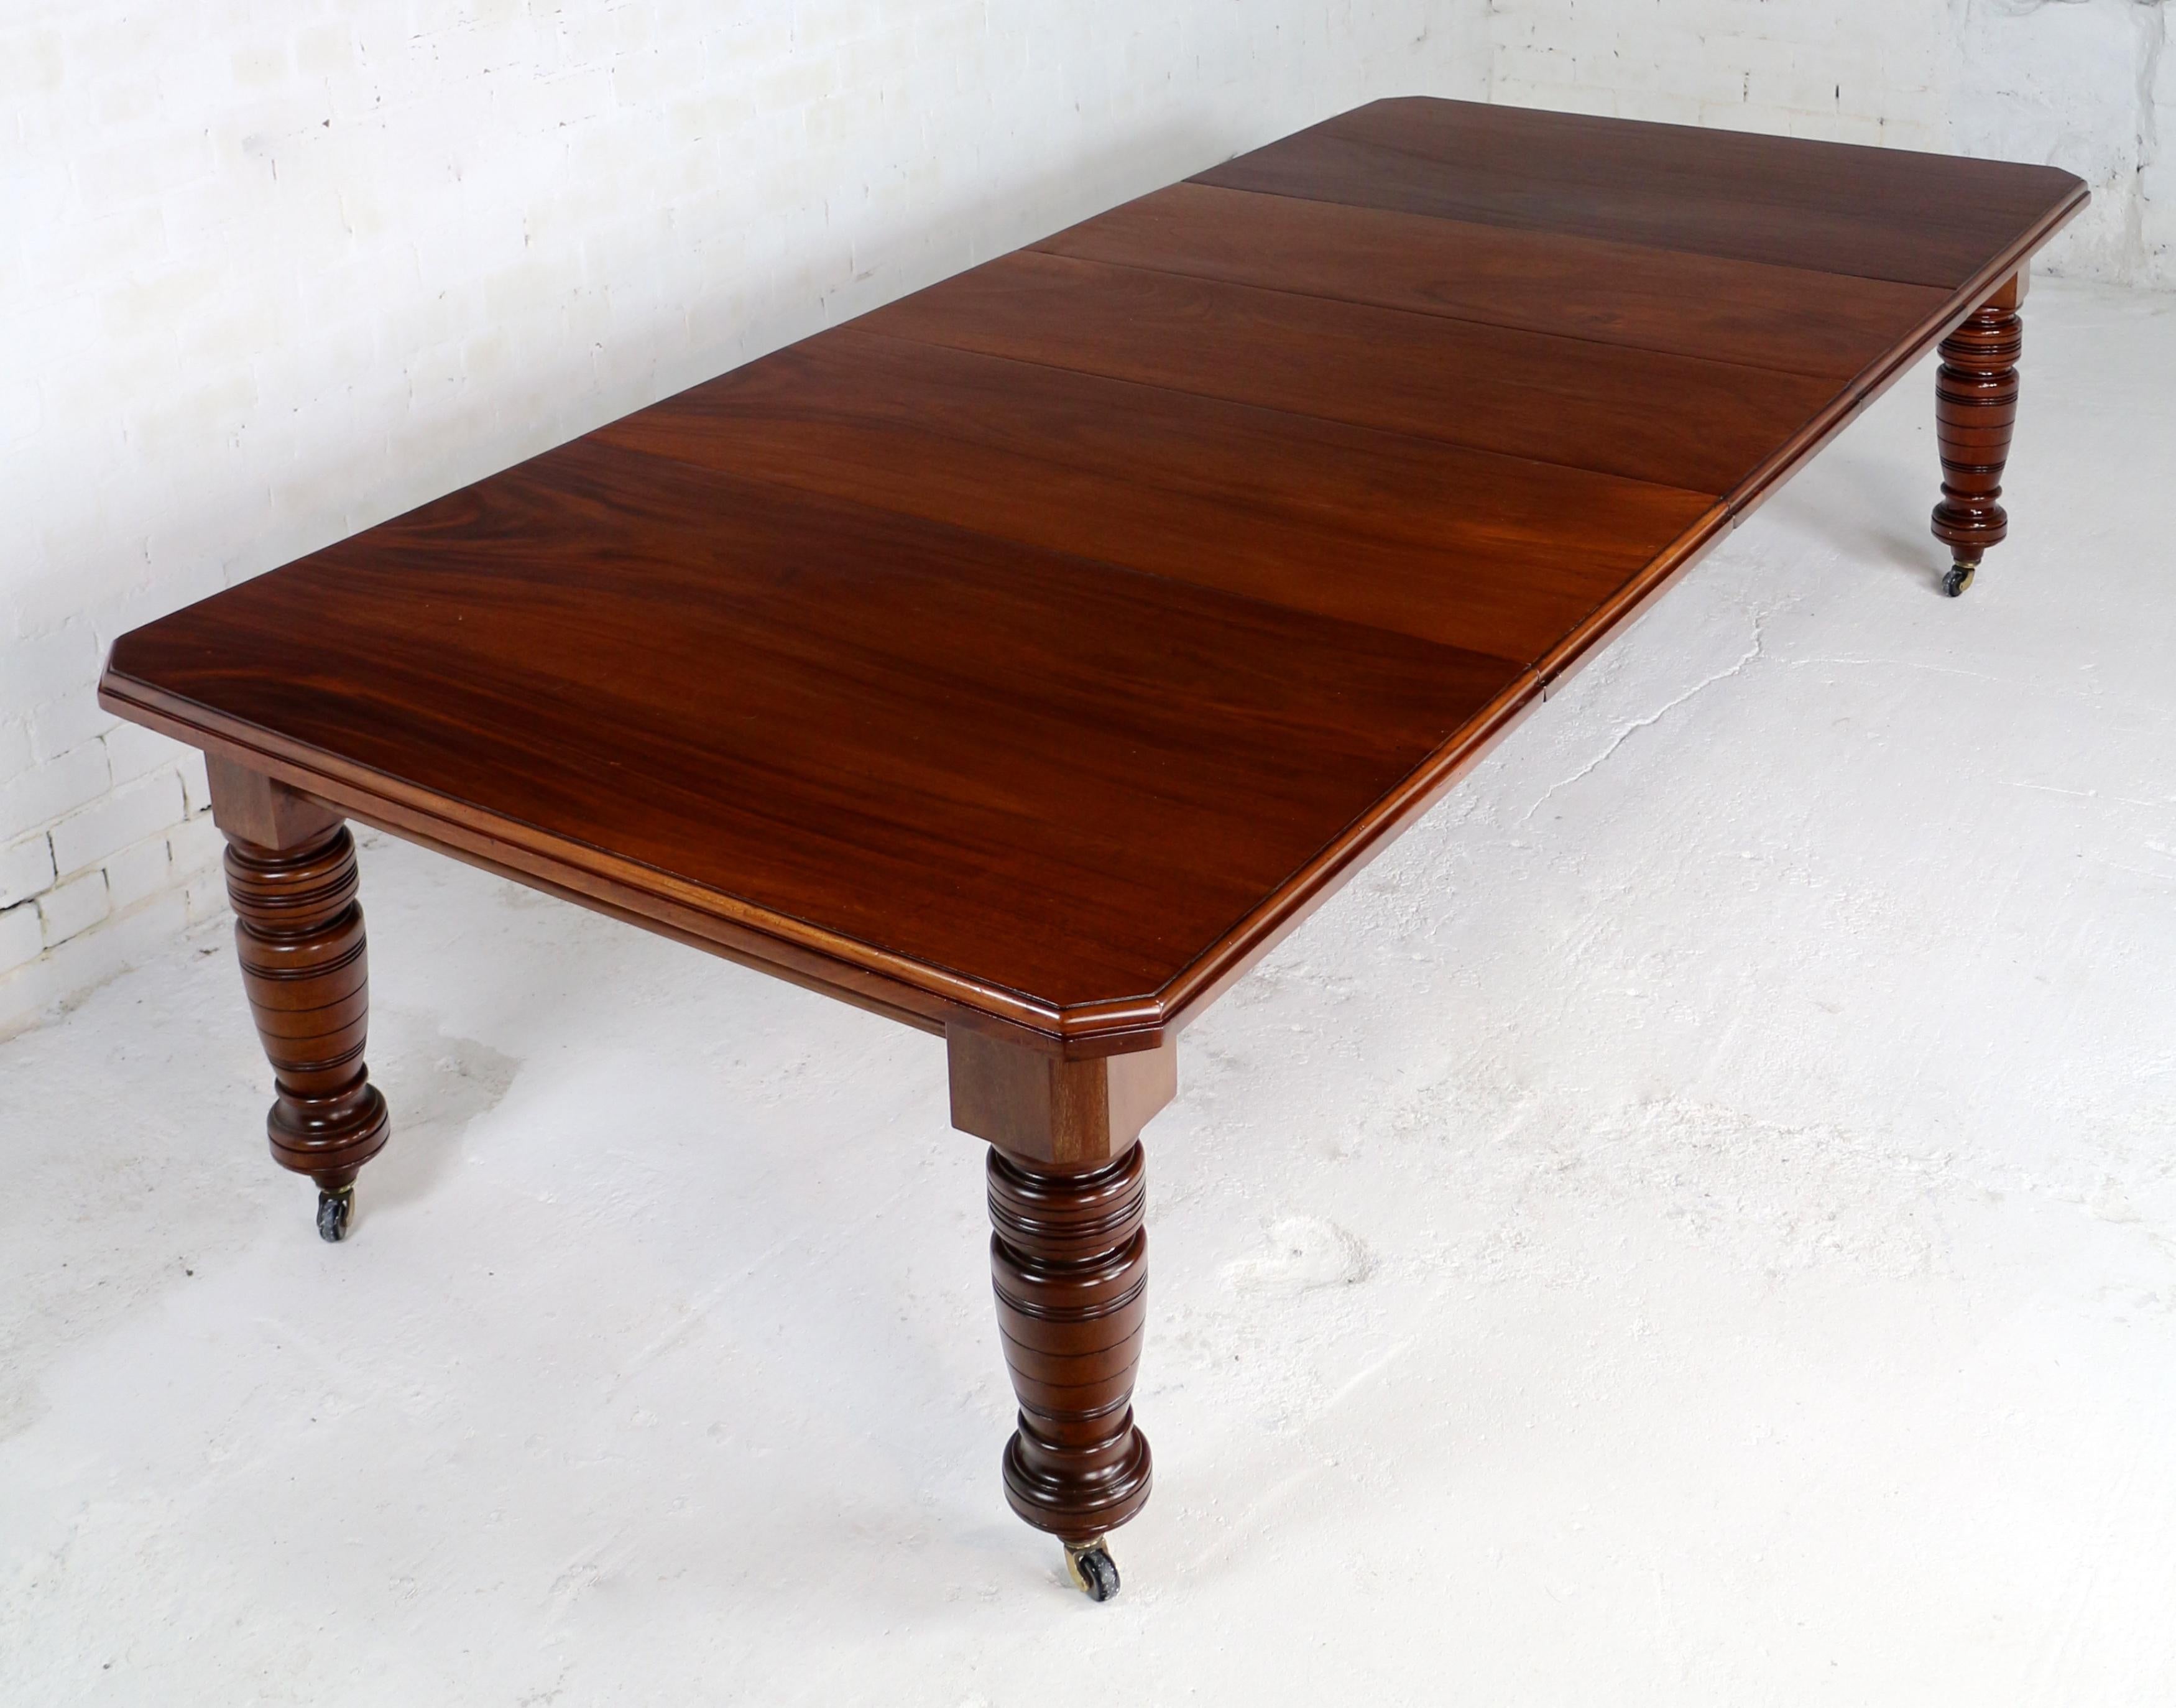 Metal Antique English Victorian Mahogany Extending Dining Table with Three Leaves